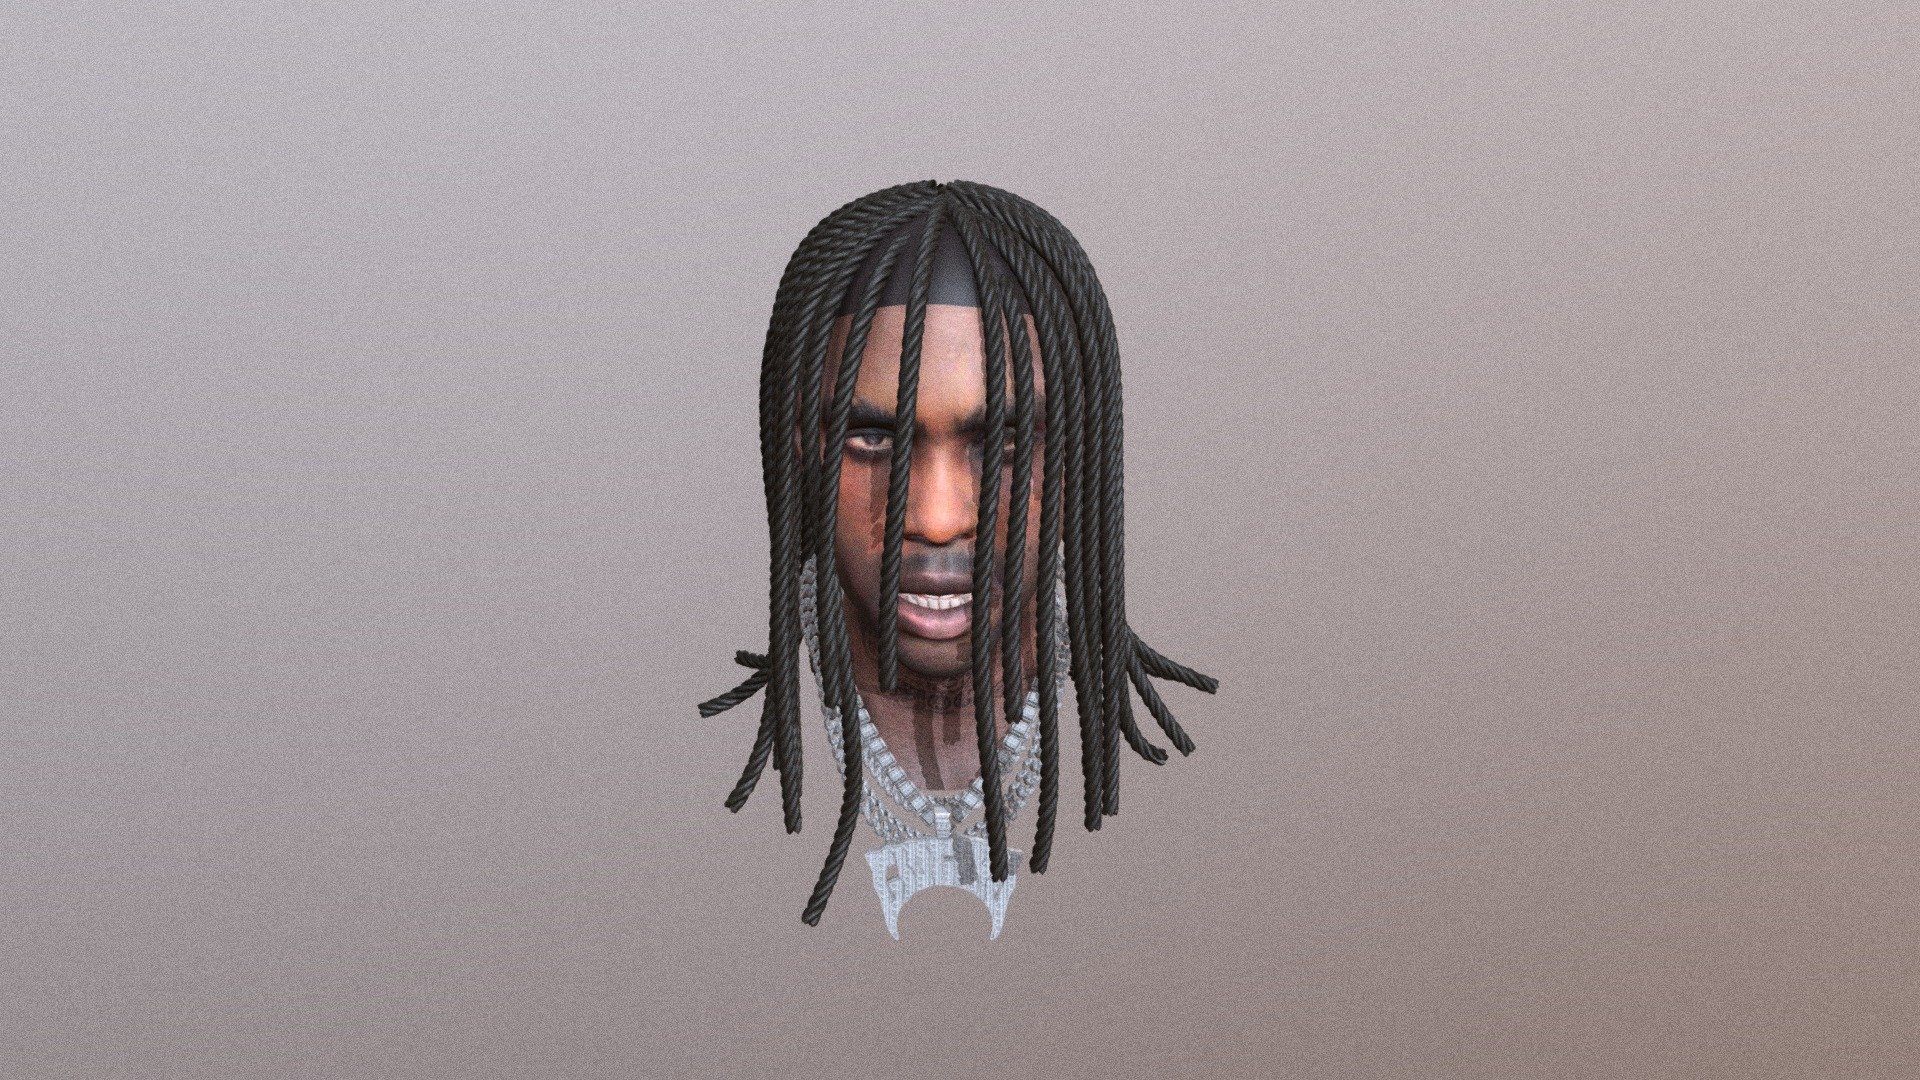 Chief Keef head model made in Cinema 4D, FaceGen, and DAZ Studio - Chief Keef - 3D model by Don Voitier (@donvoitier) 3d model